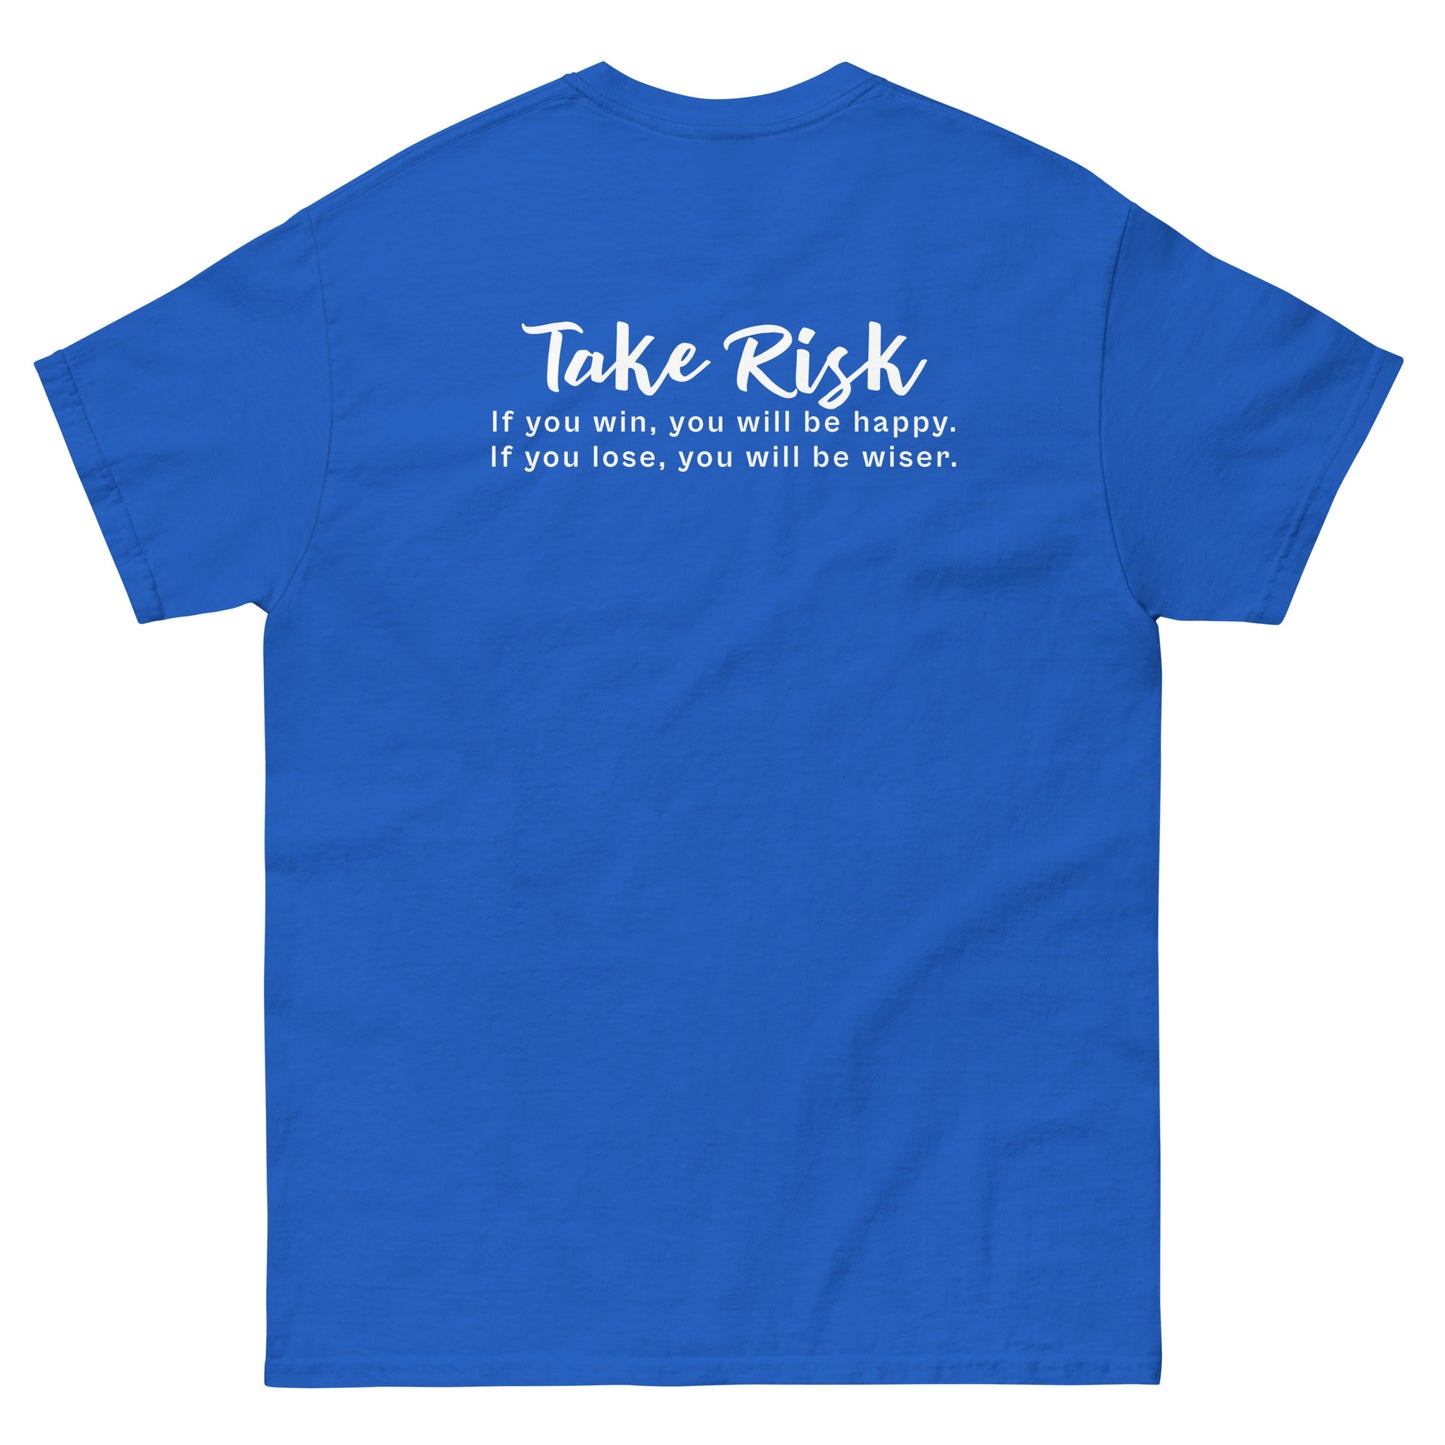 Blue High Quality Tee - Front Design with "Take Risk, if you win you will be happy, if you lose you will be wiser." print and an UFO print on left chest - Back Design with a Phrase "Take Risk, if you win you will be happy, if you lose you will be wiser." print